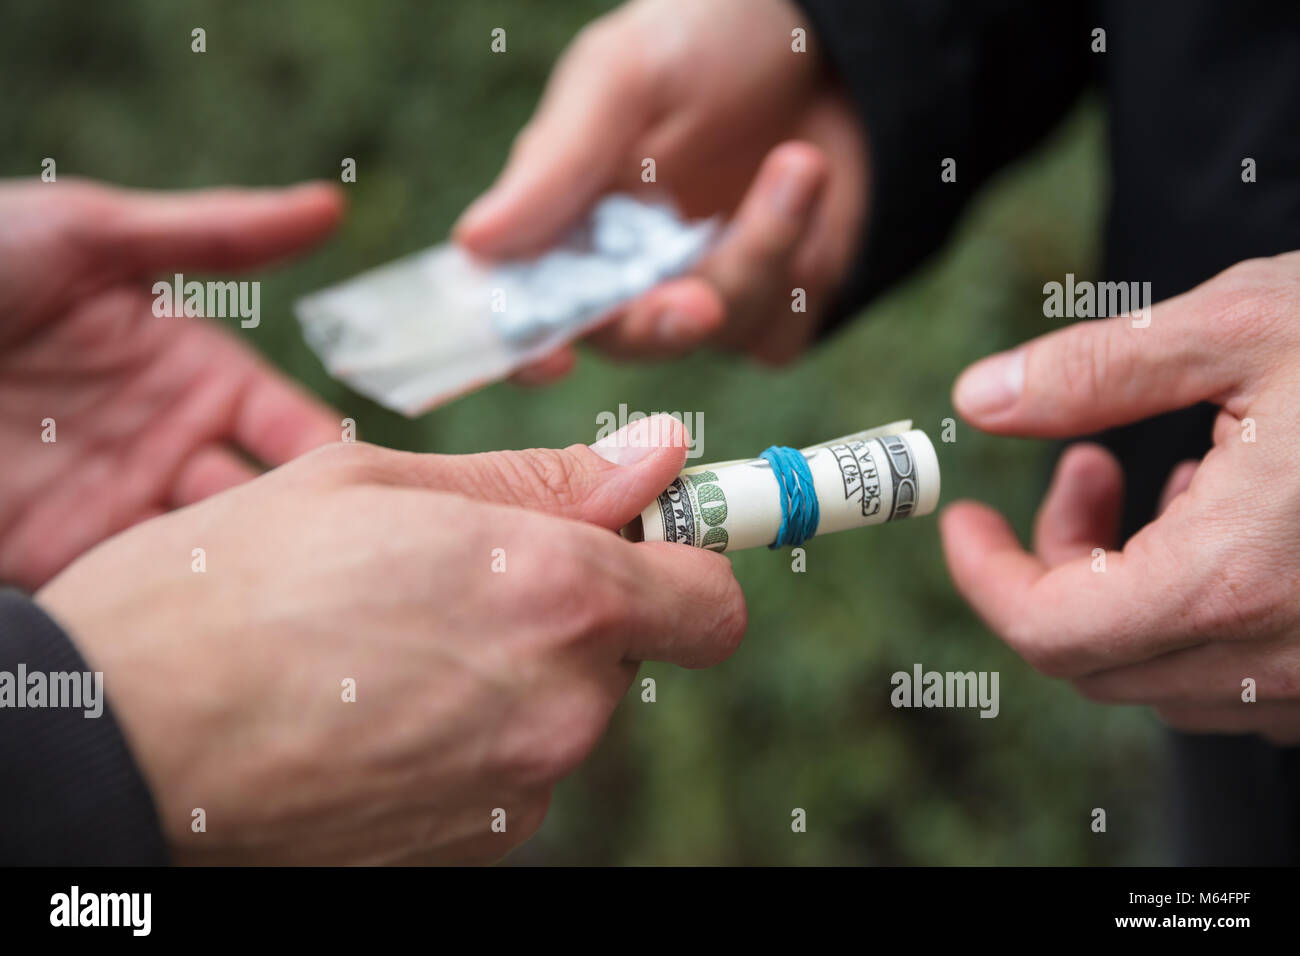 Close-up Of Person's Hand Buying Drugs In Exchange Of Money Stock Photo